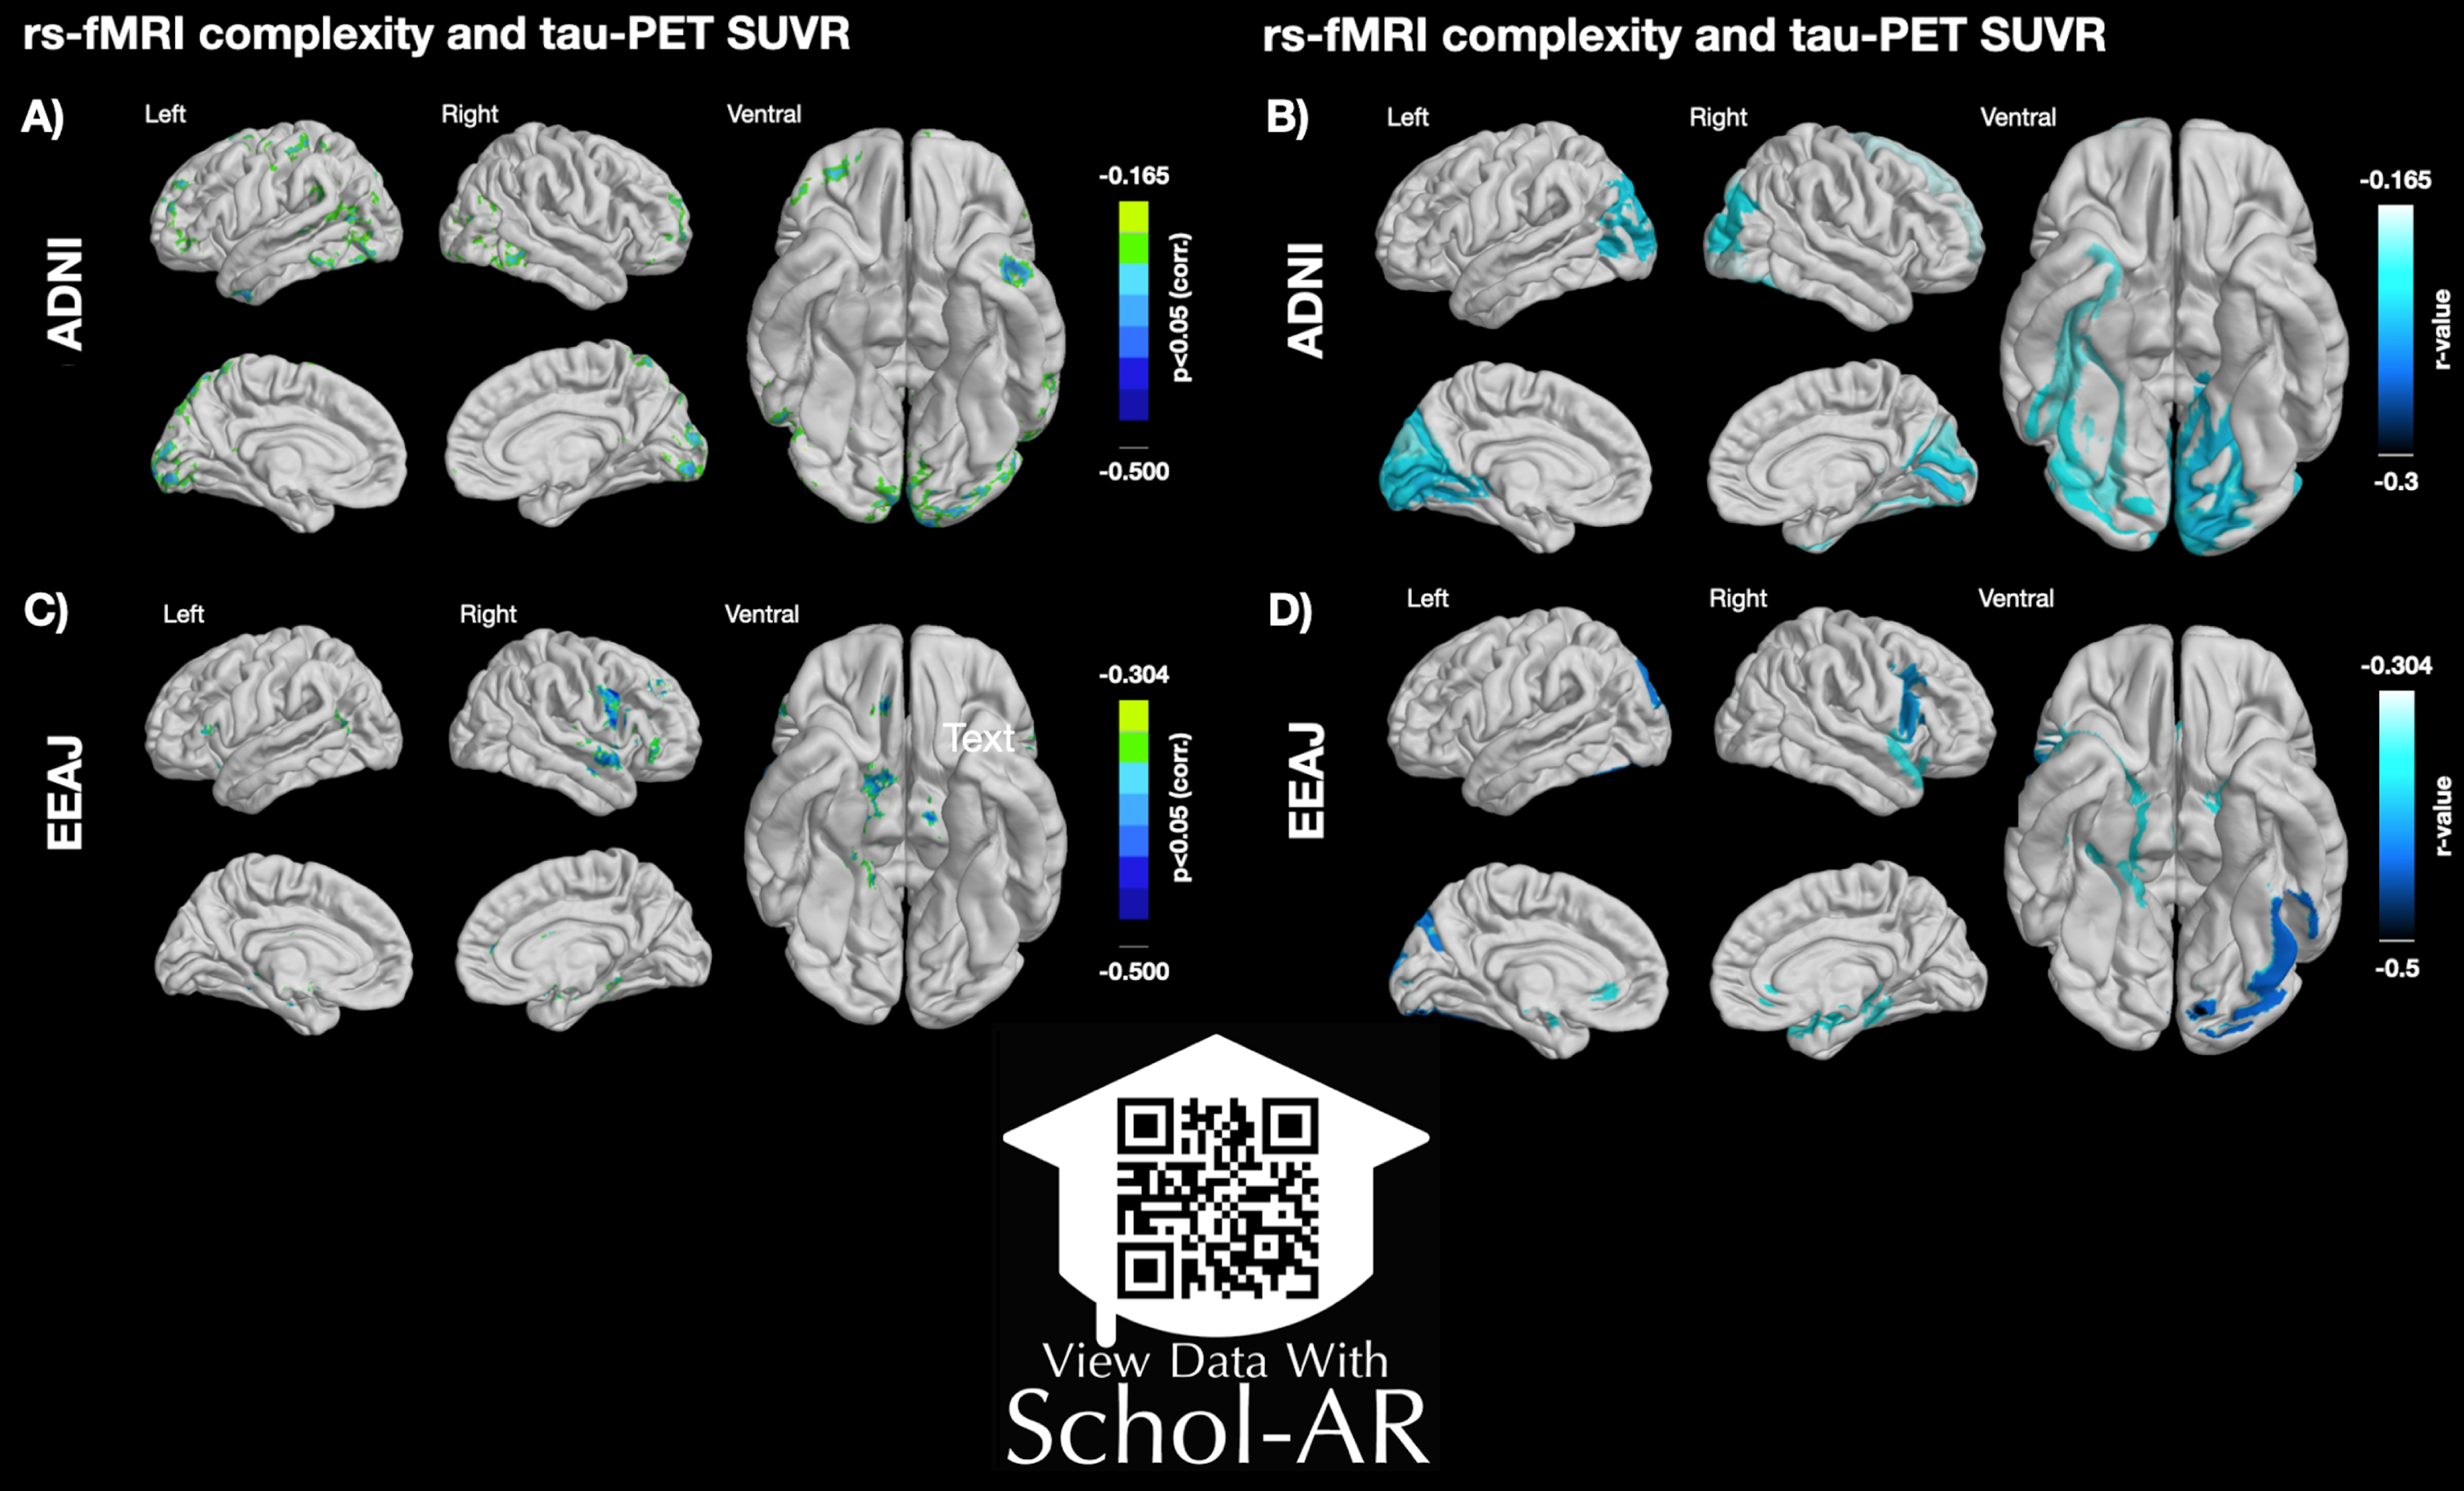 Left panel: Voxel-wise associations between rs-fMRI complexity and tau-PET SUVR in ADNI (A) and EEAJ (C) cohorts. Right panel: AAL atlas regional associations between rs-fMRI complexity and tau-PET SUVR in ADNI (B) and EEAJ (D) cohorts. AAL, automated anatomical labeling atlas. ScholAR QR code will enable augmented reality 3D visualization of the results displayed in the left panel using the Schol-AR app or opening manuscript pdf in https://www.schol-ar.io/reader. A citation for Schol-AR: Ard T, Bienkowski MS, Liew S-L, Sepehrband F, Yan L, Toga AW, Integrating Data Directly into Publications with Augmented Reality and Web-Based Technologies - Schol-AR (2022) Scientific Data 9: 298. https://www.nature.com/articles/s41597-022-01426-y